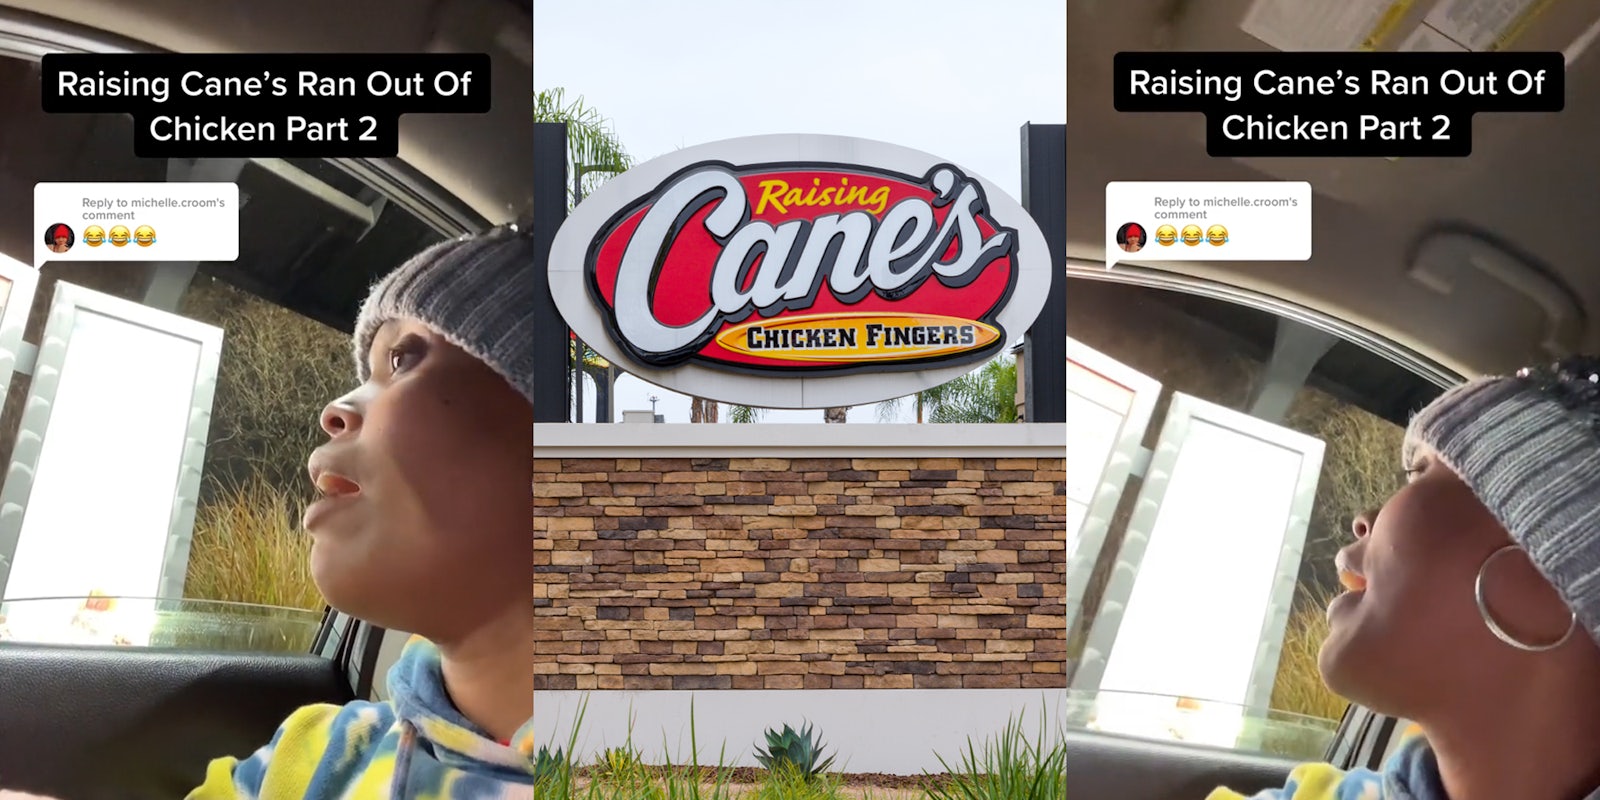 woman speaking at Raising Cane's drive thru caption 'Raising Cane's Ran Out Of Chicken Part 2' (l) Raising Cane's Chicken Fingers sign outside (c) woman speaking at Raising Cane's drive thru caption 'Raising Cane's Ran Out Of Chicken Part 2' (r)